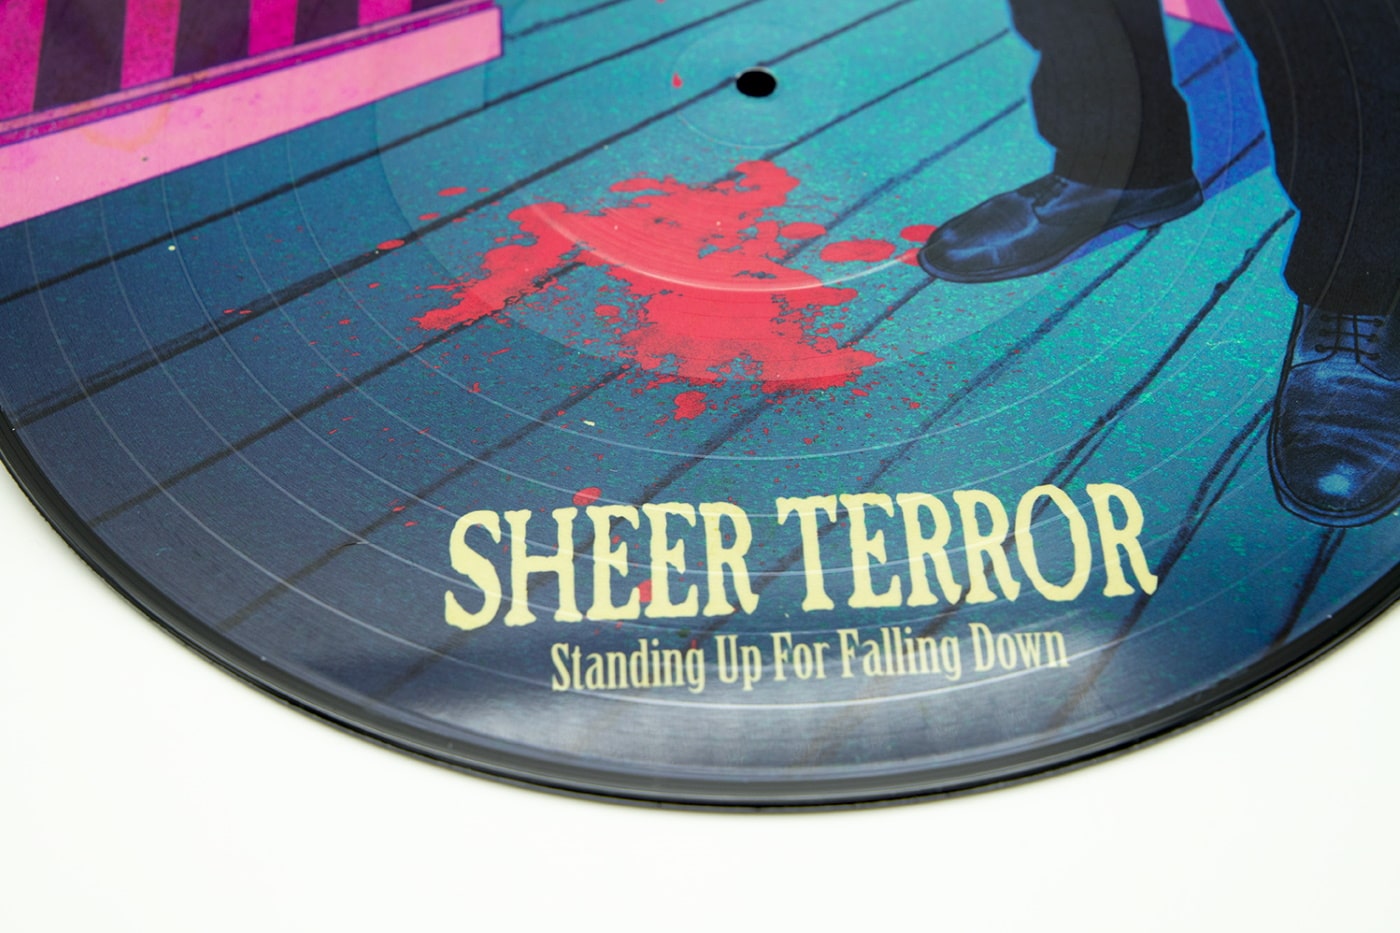 SHEER TERROR “Standing Up For Falling Down” Picture Disc 12″ vinyl, “Rose” Edition